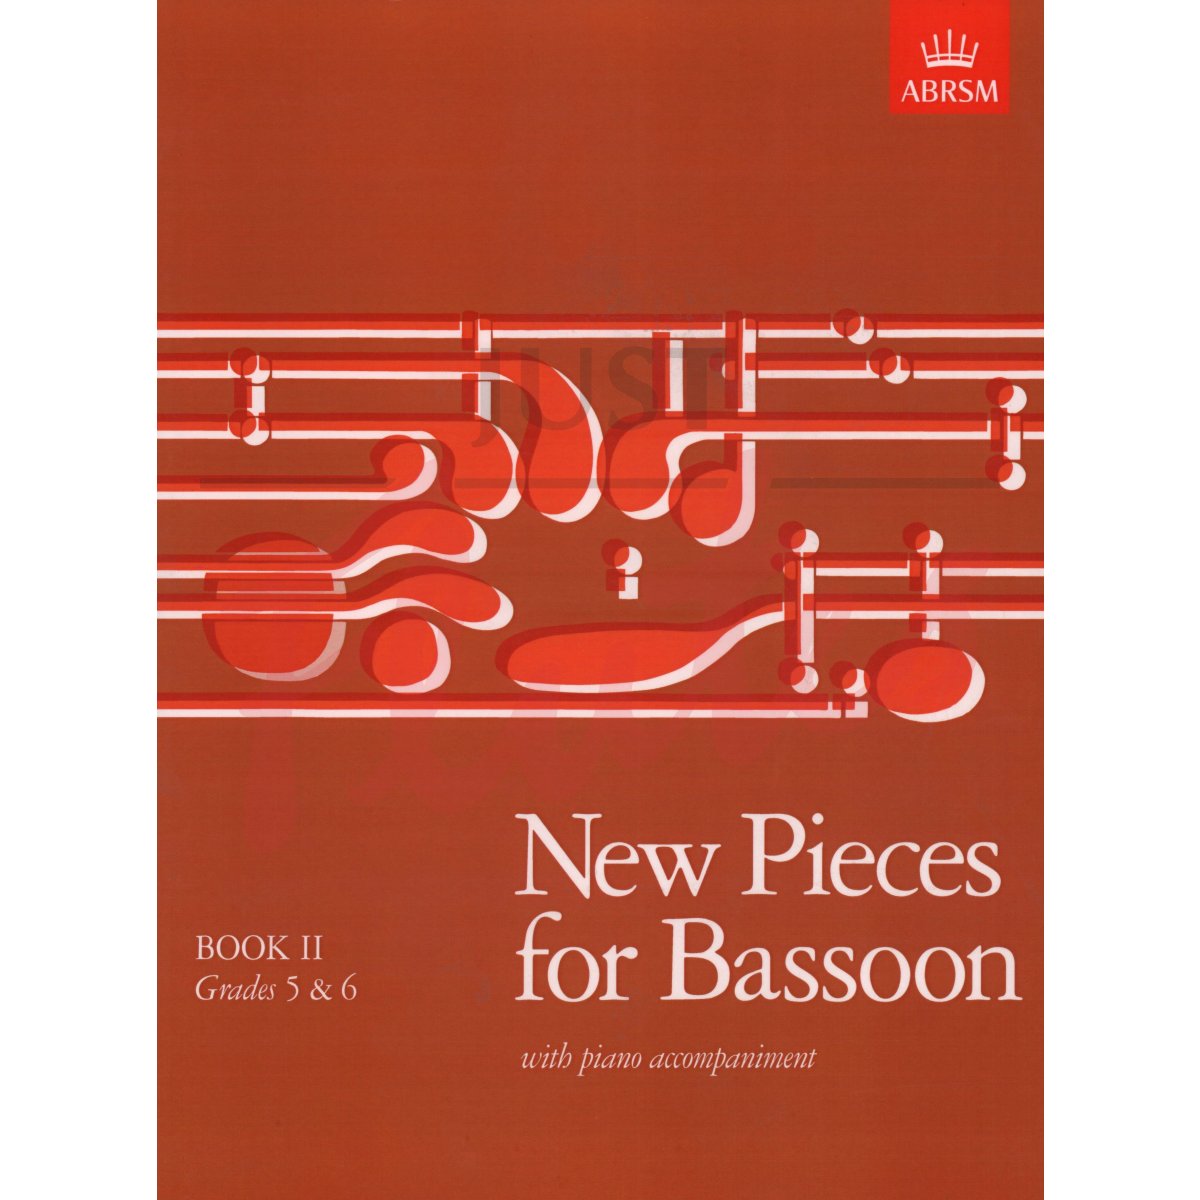 New Pieces for Bassoon, Book 2